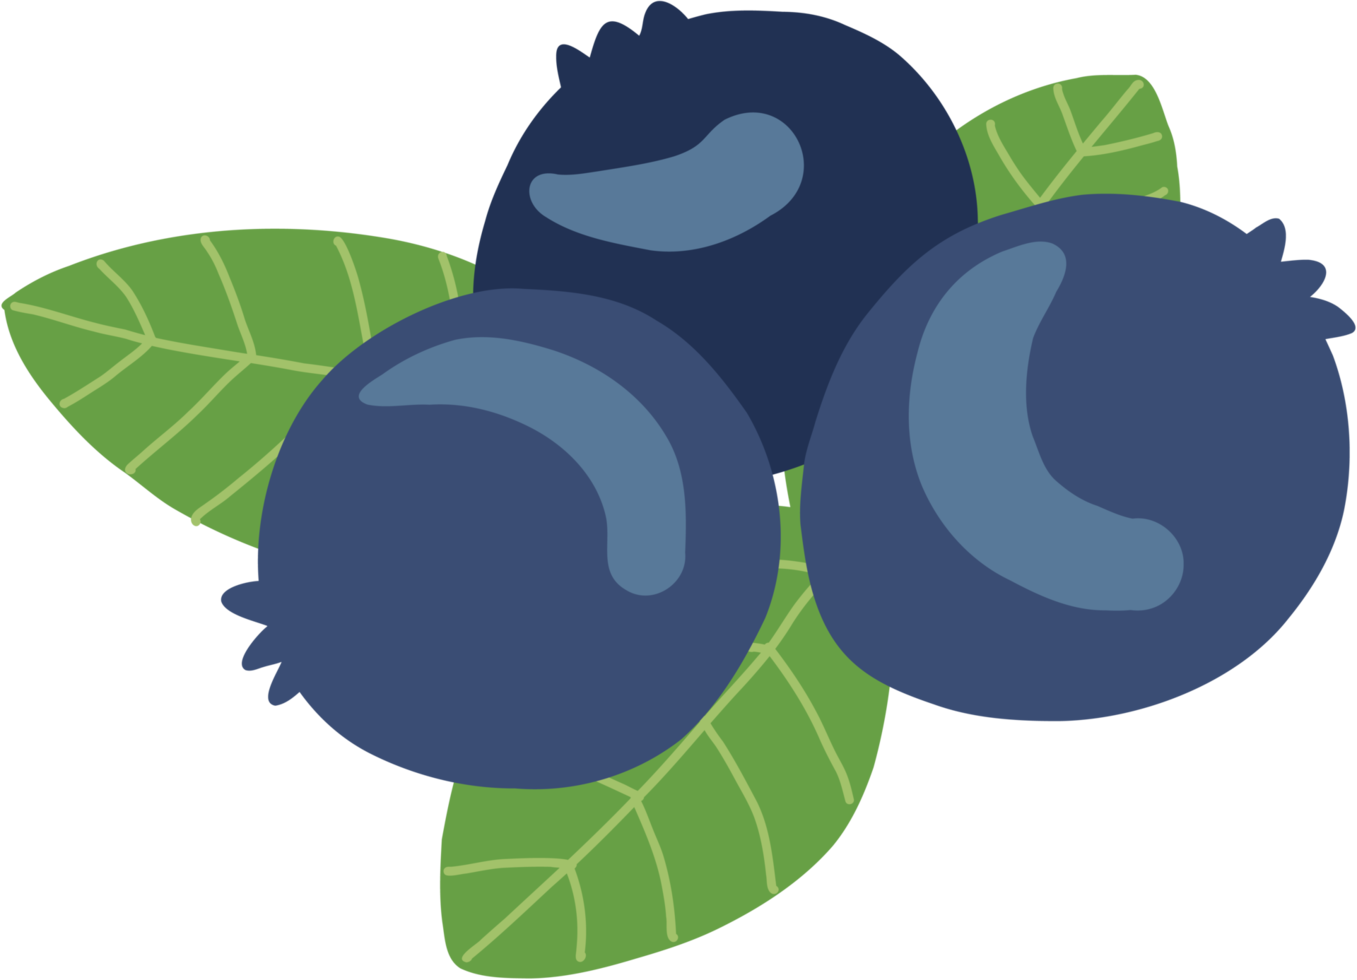 doodle freehand sketch drawing of blueberry fruit. png